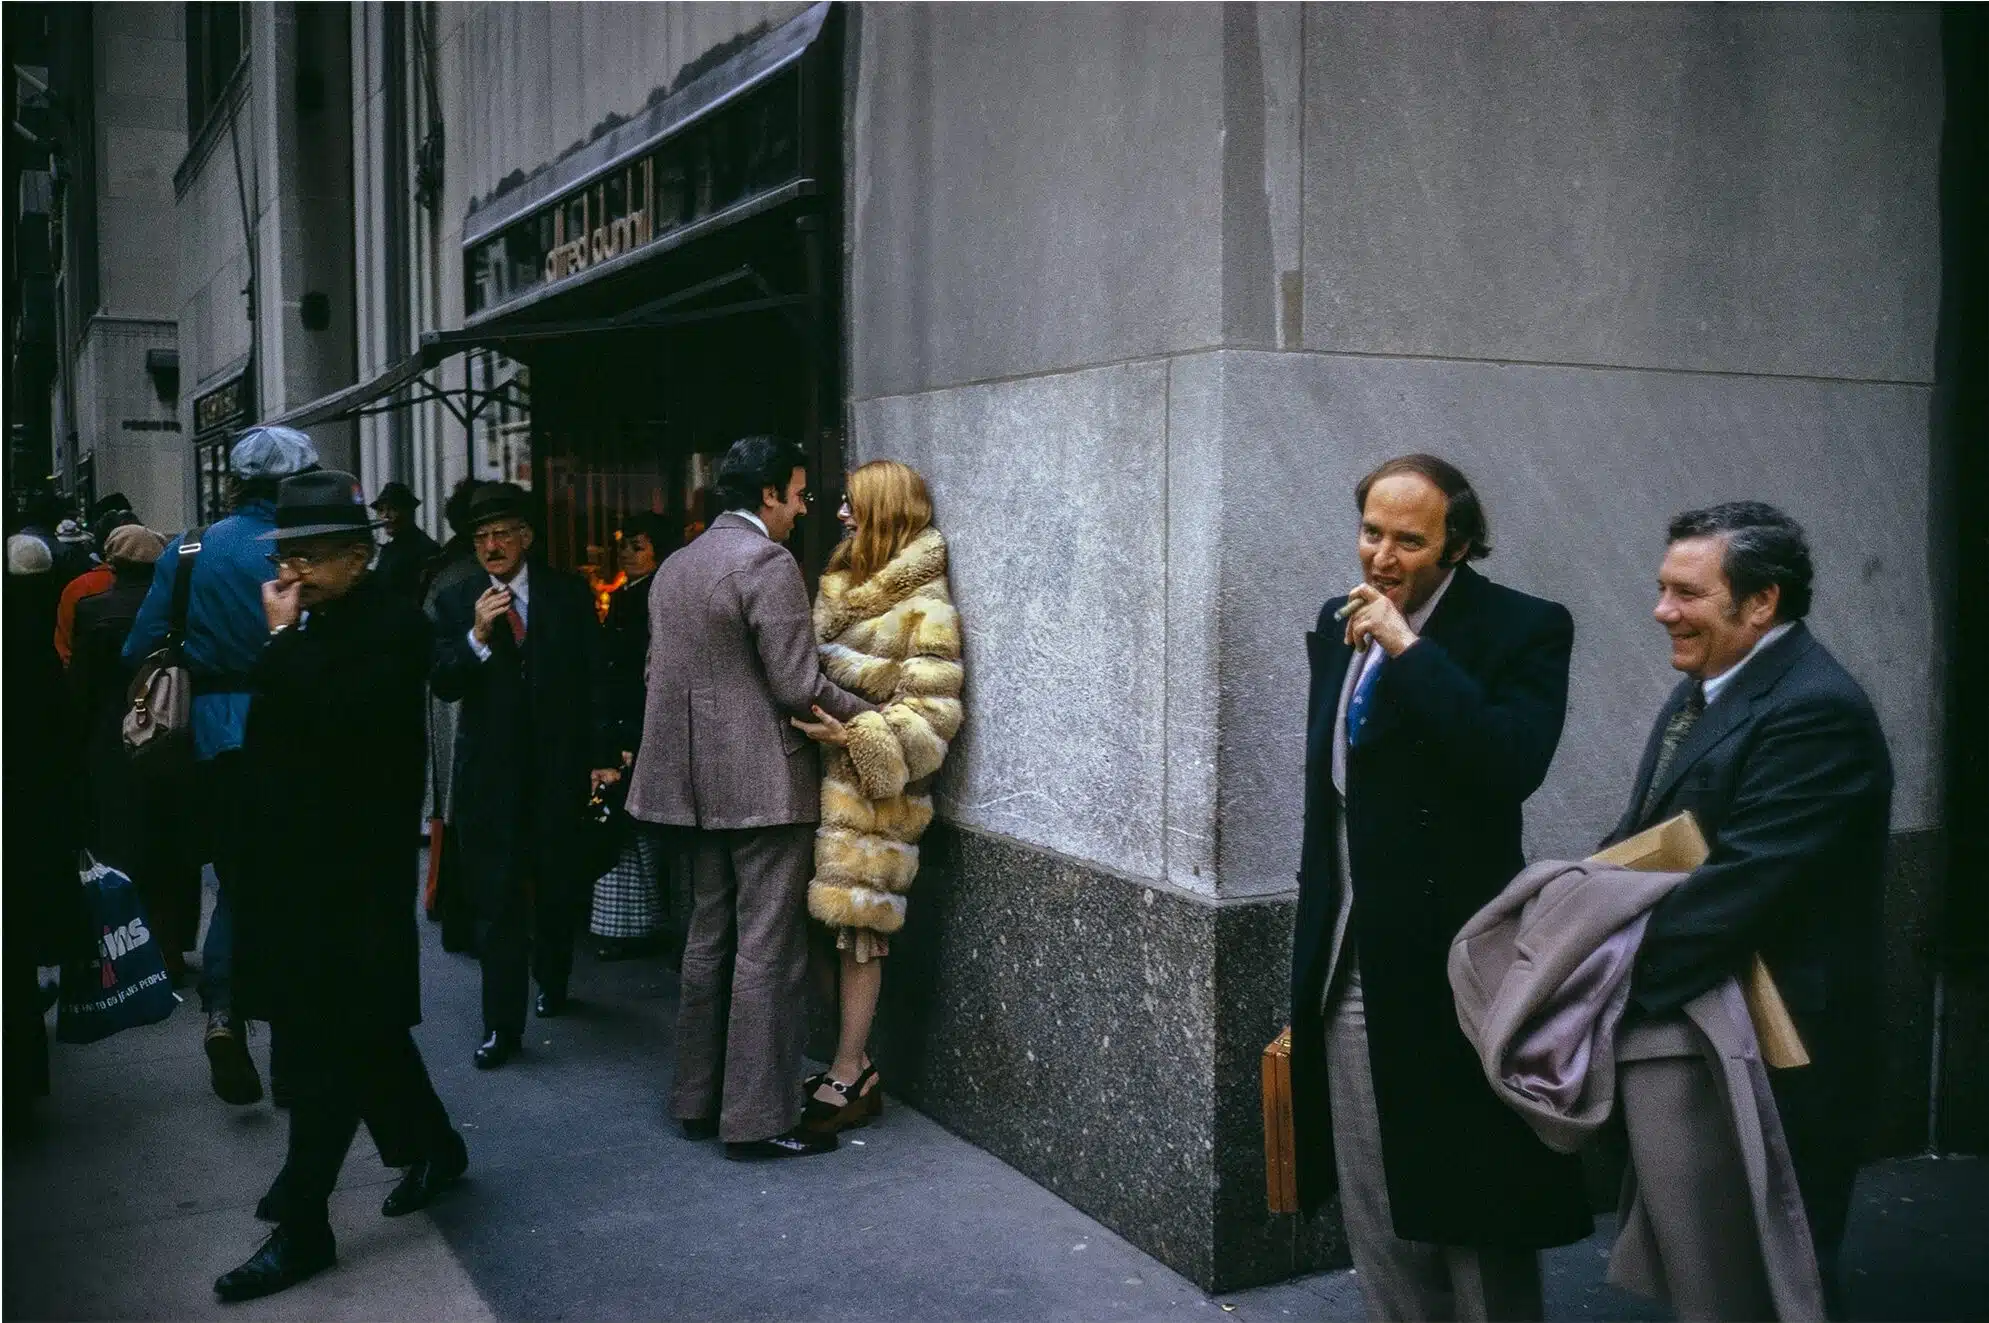 A unique opportunity to buy a signed Joel Meyerowitz print